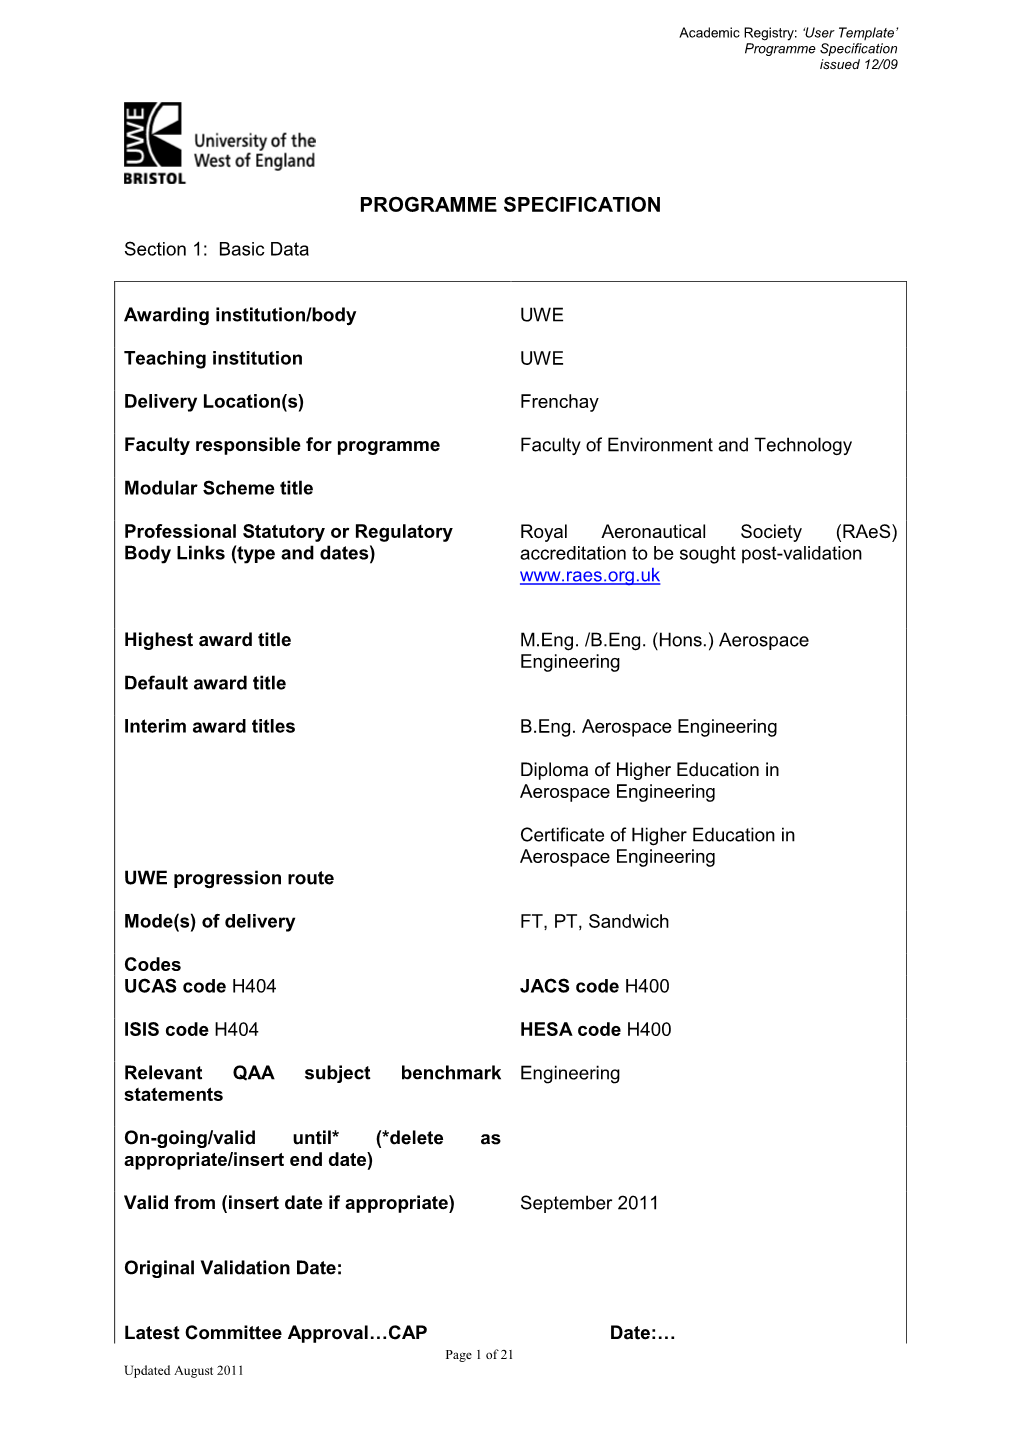 Programme Specification Issued 12/09